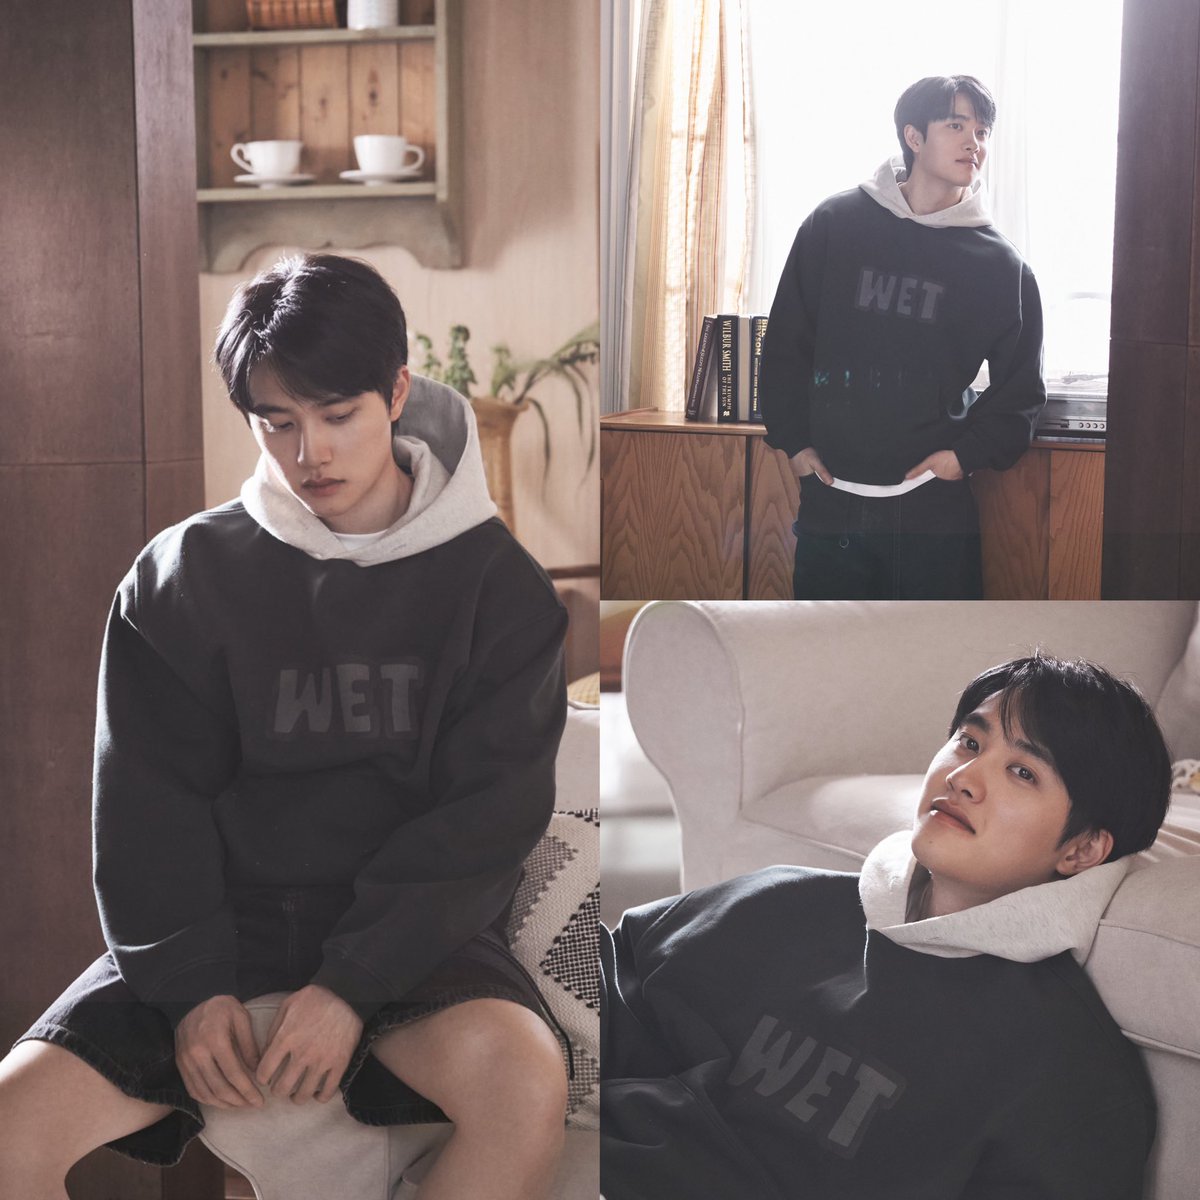 Kyungsoo in his 'WET' sweater

#도경수_성장 #BLOSSOM_Images3 #DOHKYUNGSOO_BLOSSOM